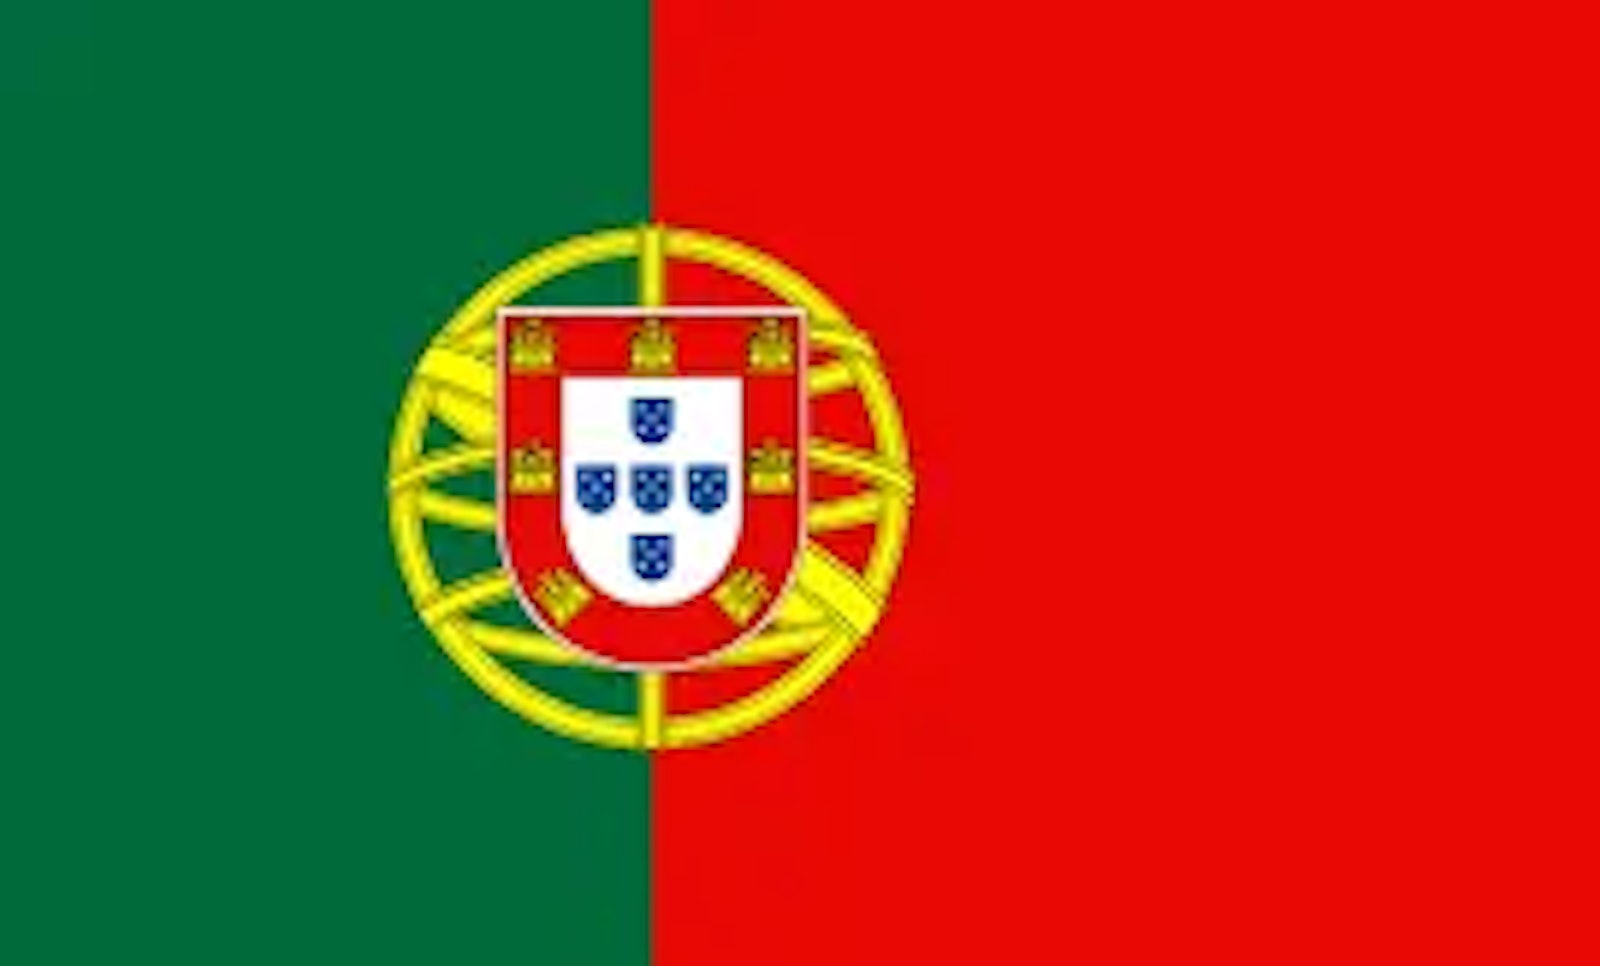 Portugal (Personal)